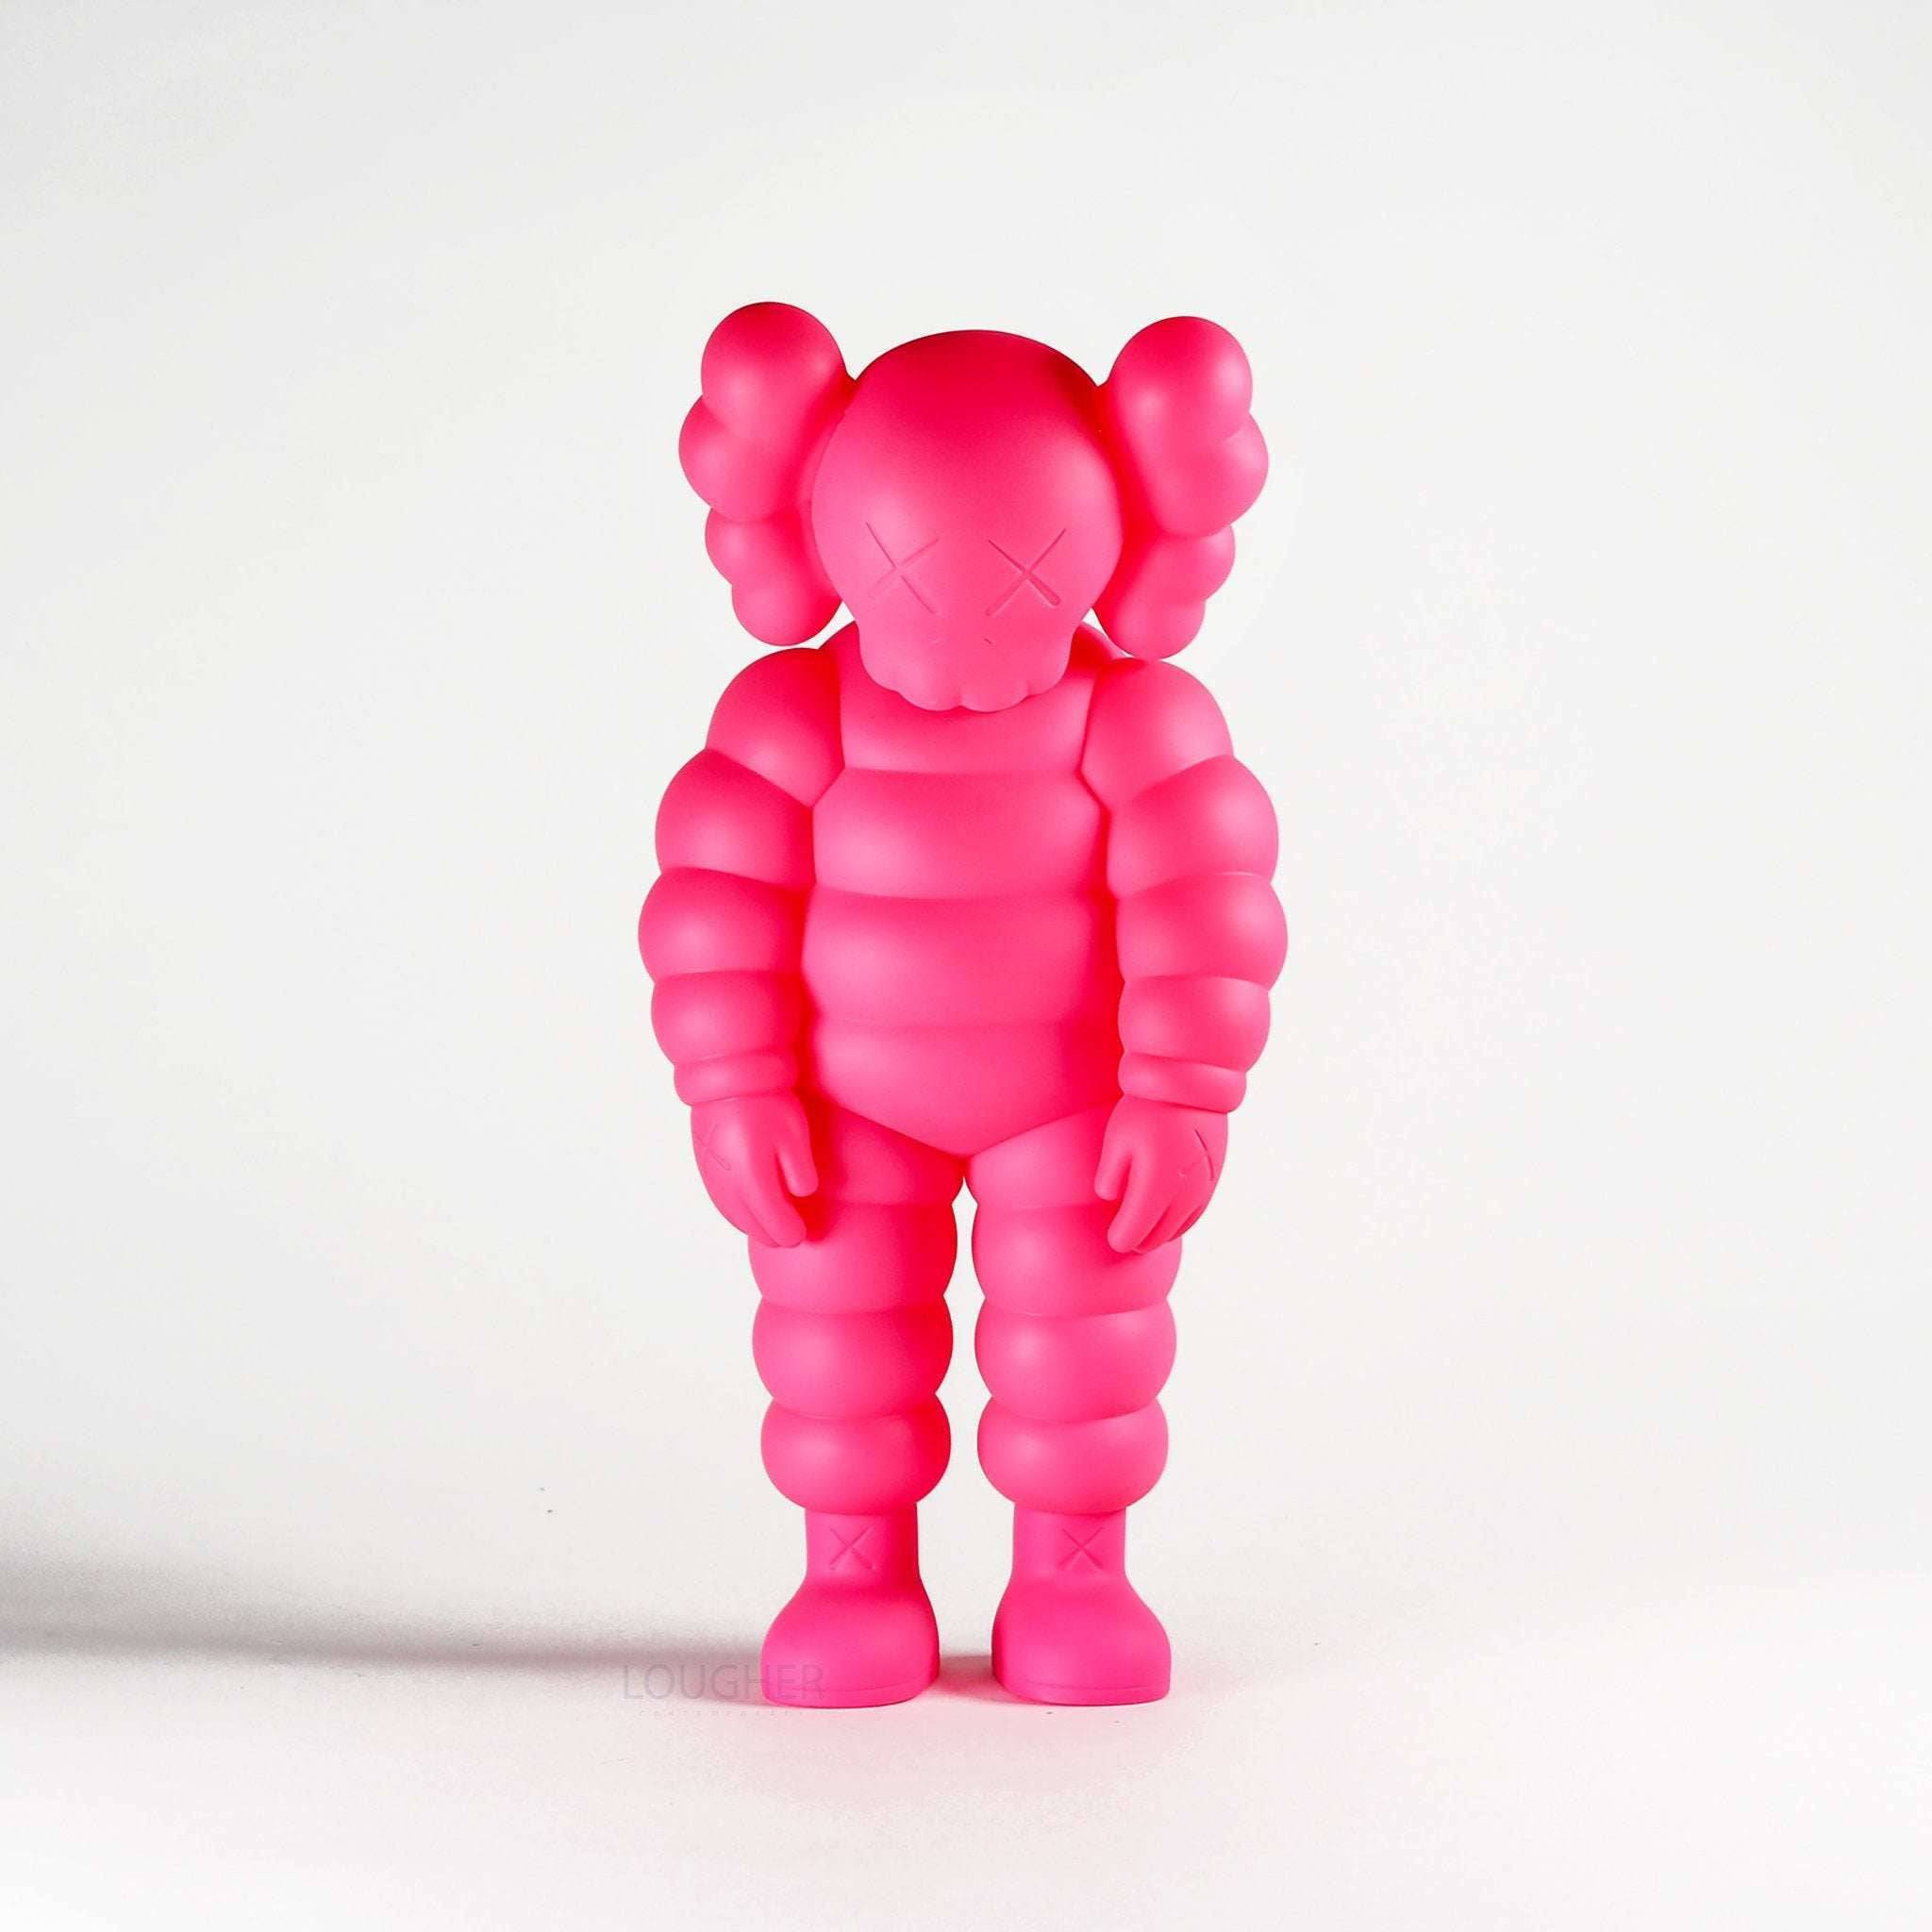 KAWS, What Party - Chum, 2020 For Sale - Lougher Contemporary